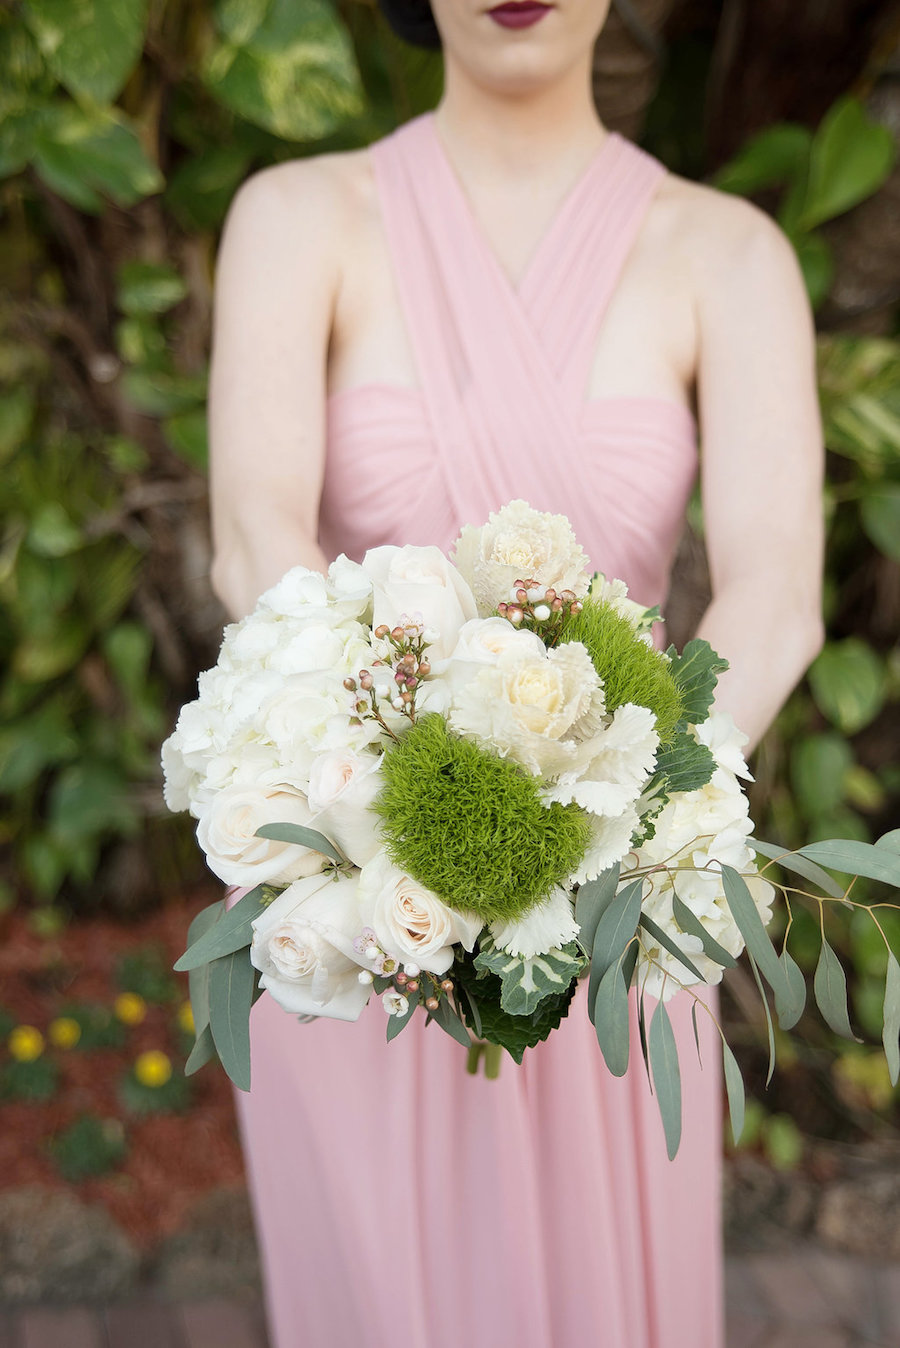 White Rose and Floral Bouquet with Succulents and Greenery and Davids Bridal Blush Bridesmaid Dress | St. Petersburg Wedding Photographer Kristen Marie Photography